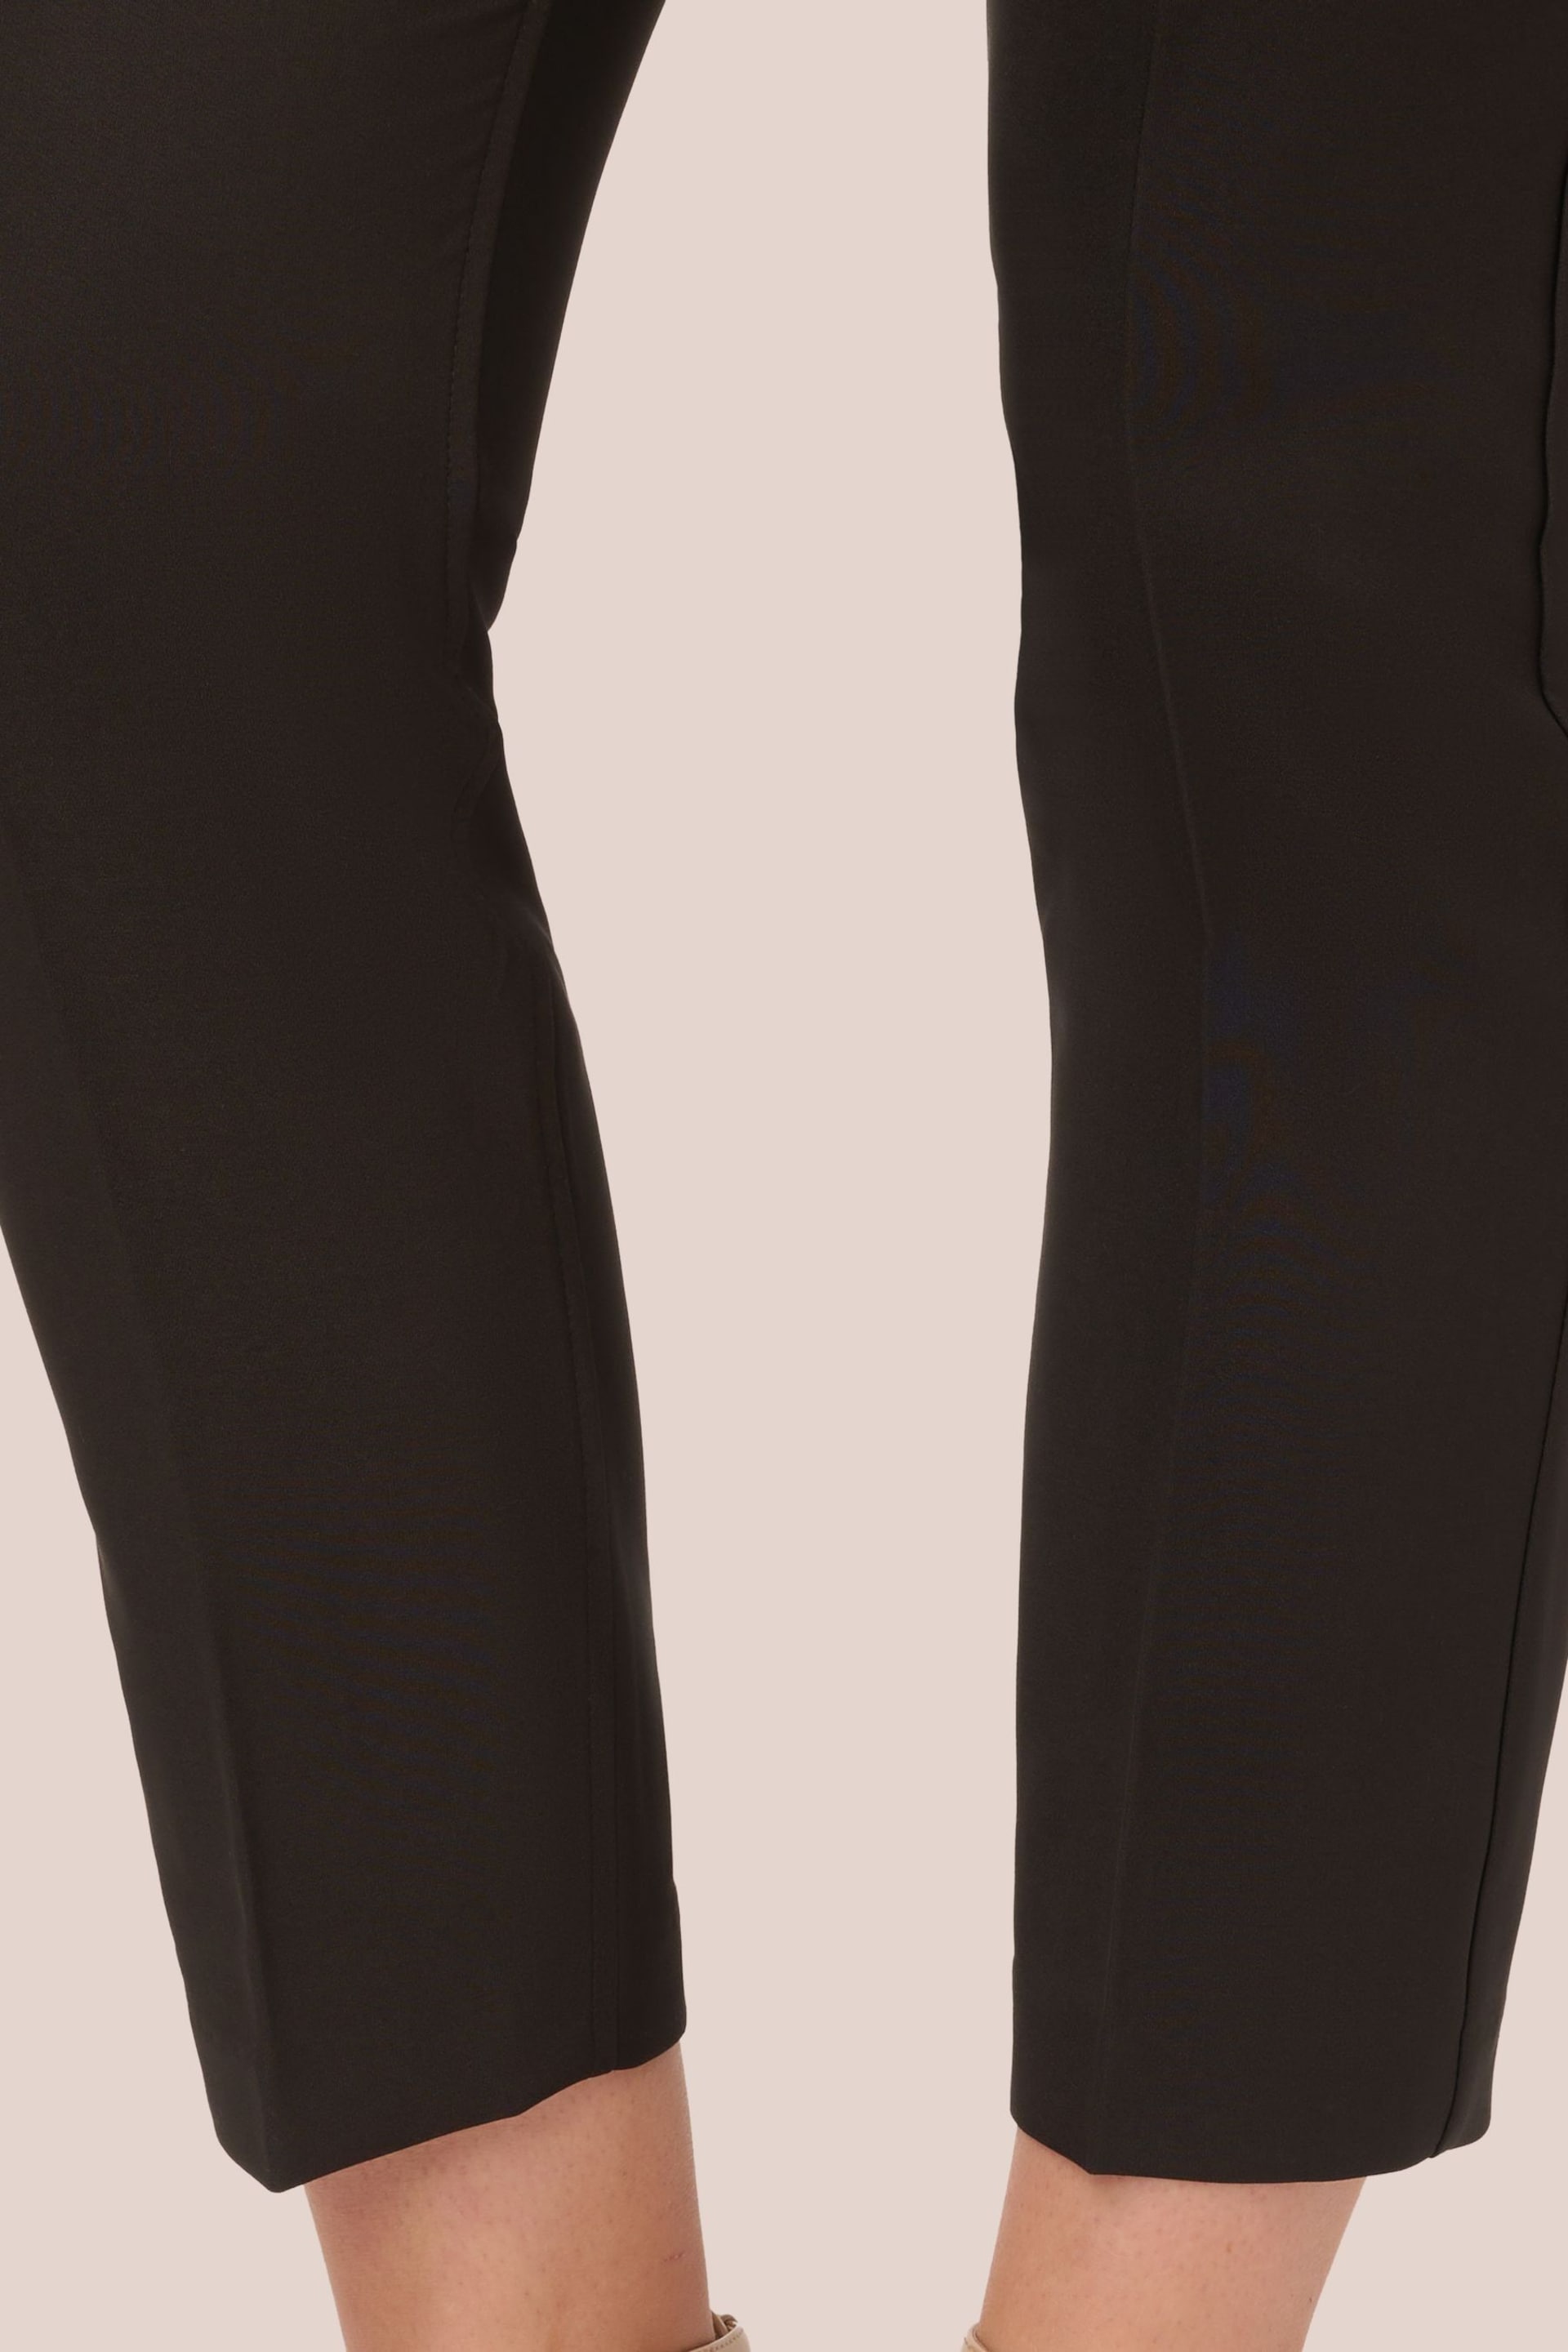 Adrianna Papell Solid Bi-Stretch Pull-On Black Trousers - Image 5 of 6